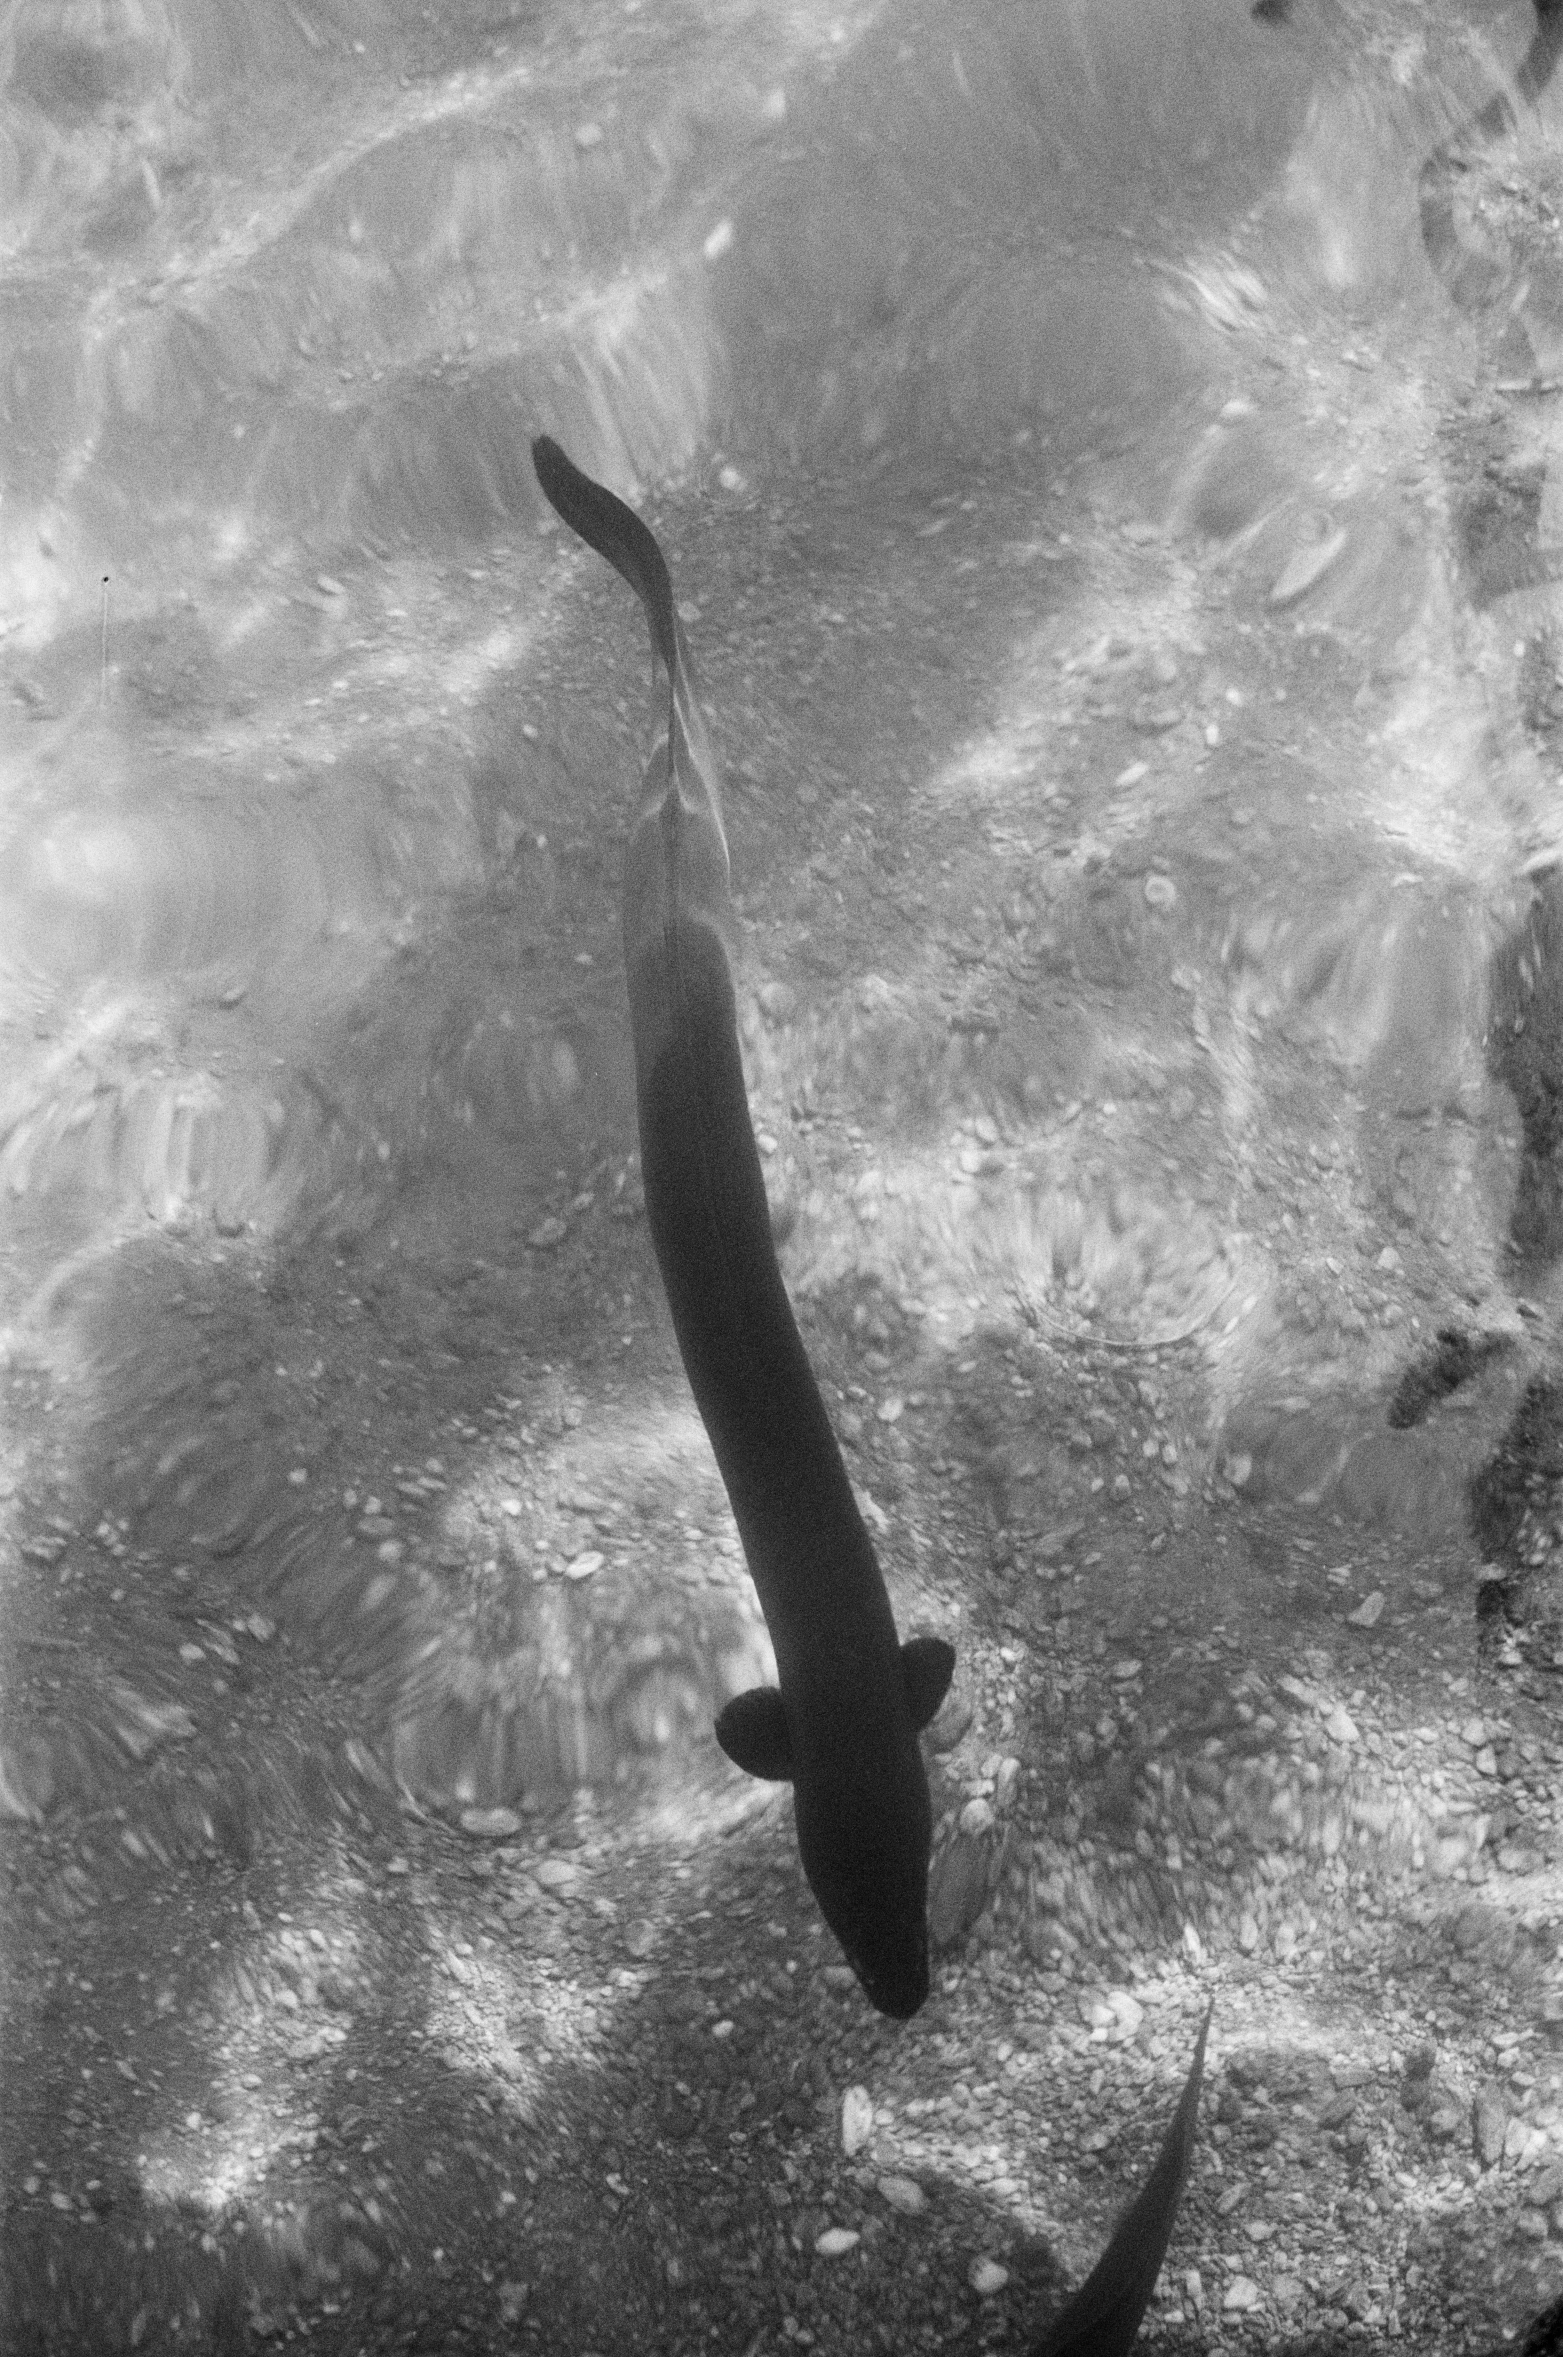 a black and white pograph of water with fish